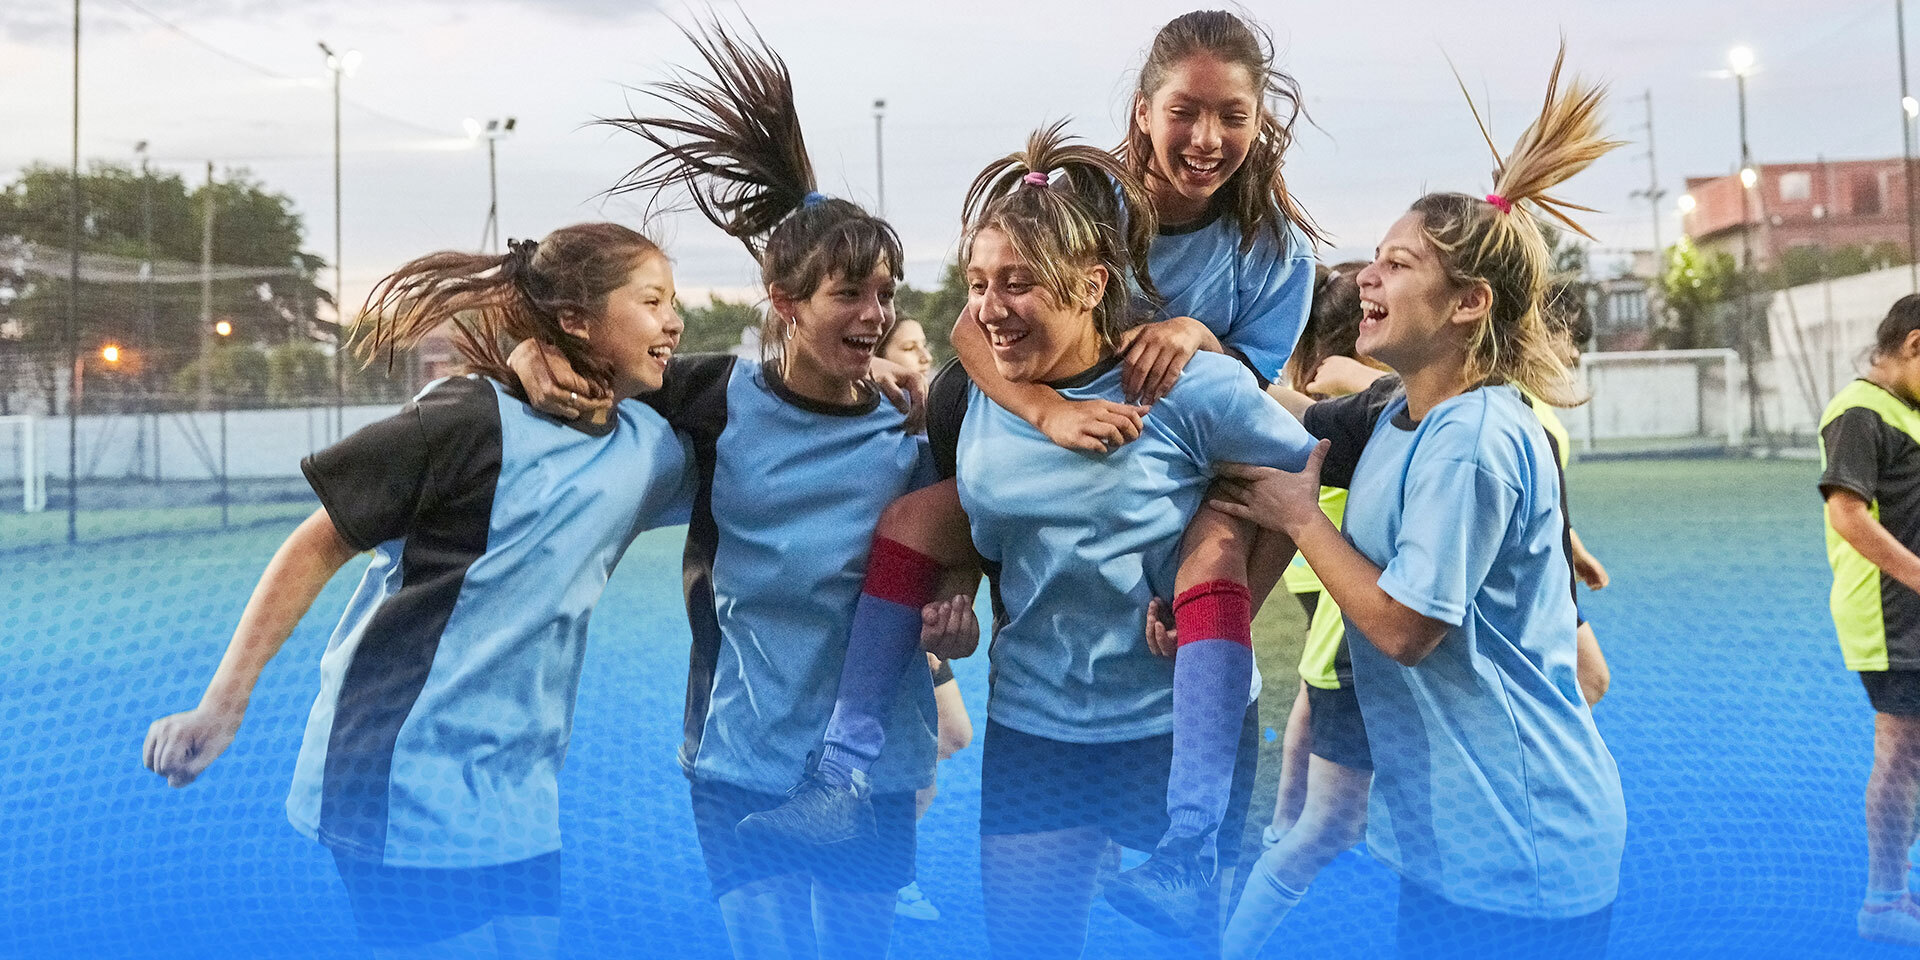 Game Changers: Empowering Latino Youth through Sport and the 2026 World Cup